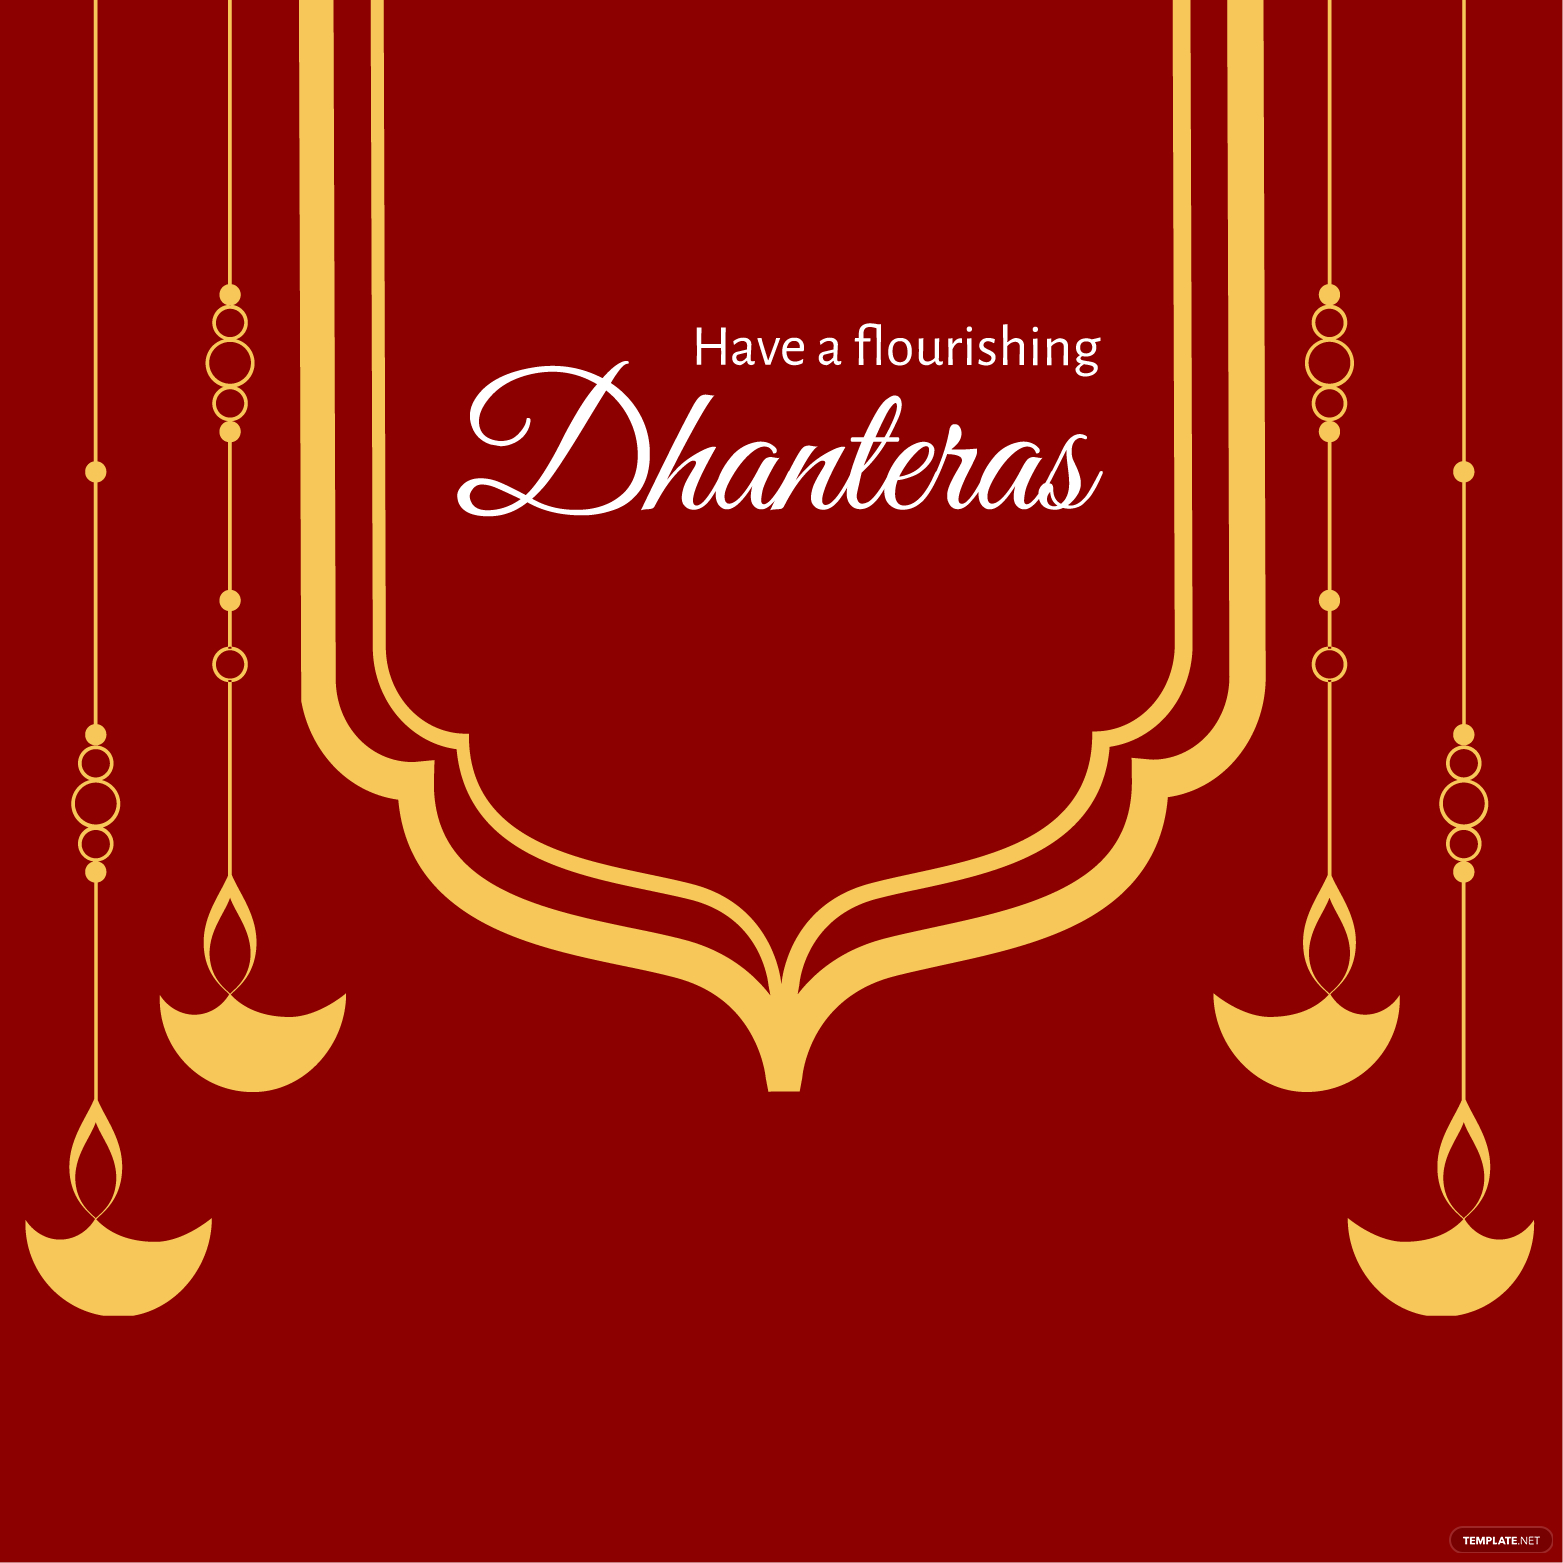 dhanteras greeting card ideas and examples